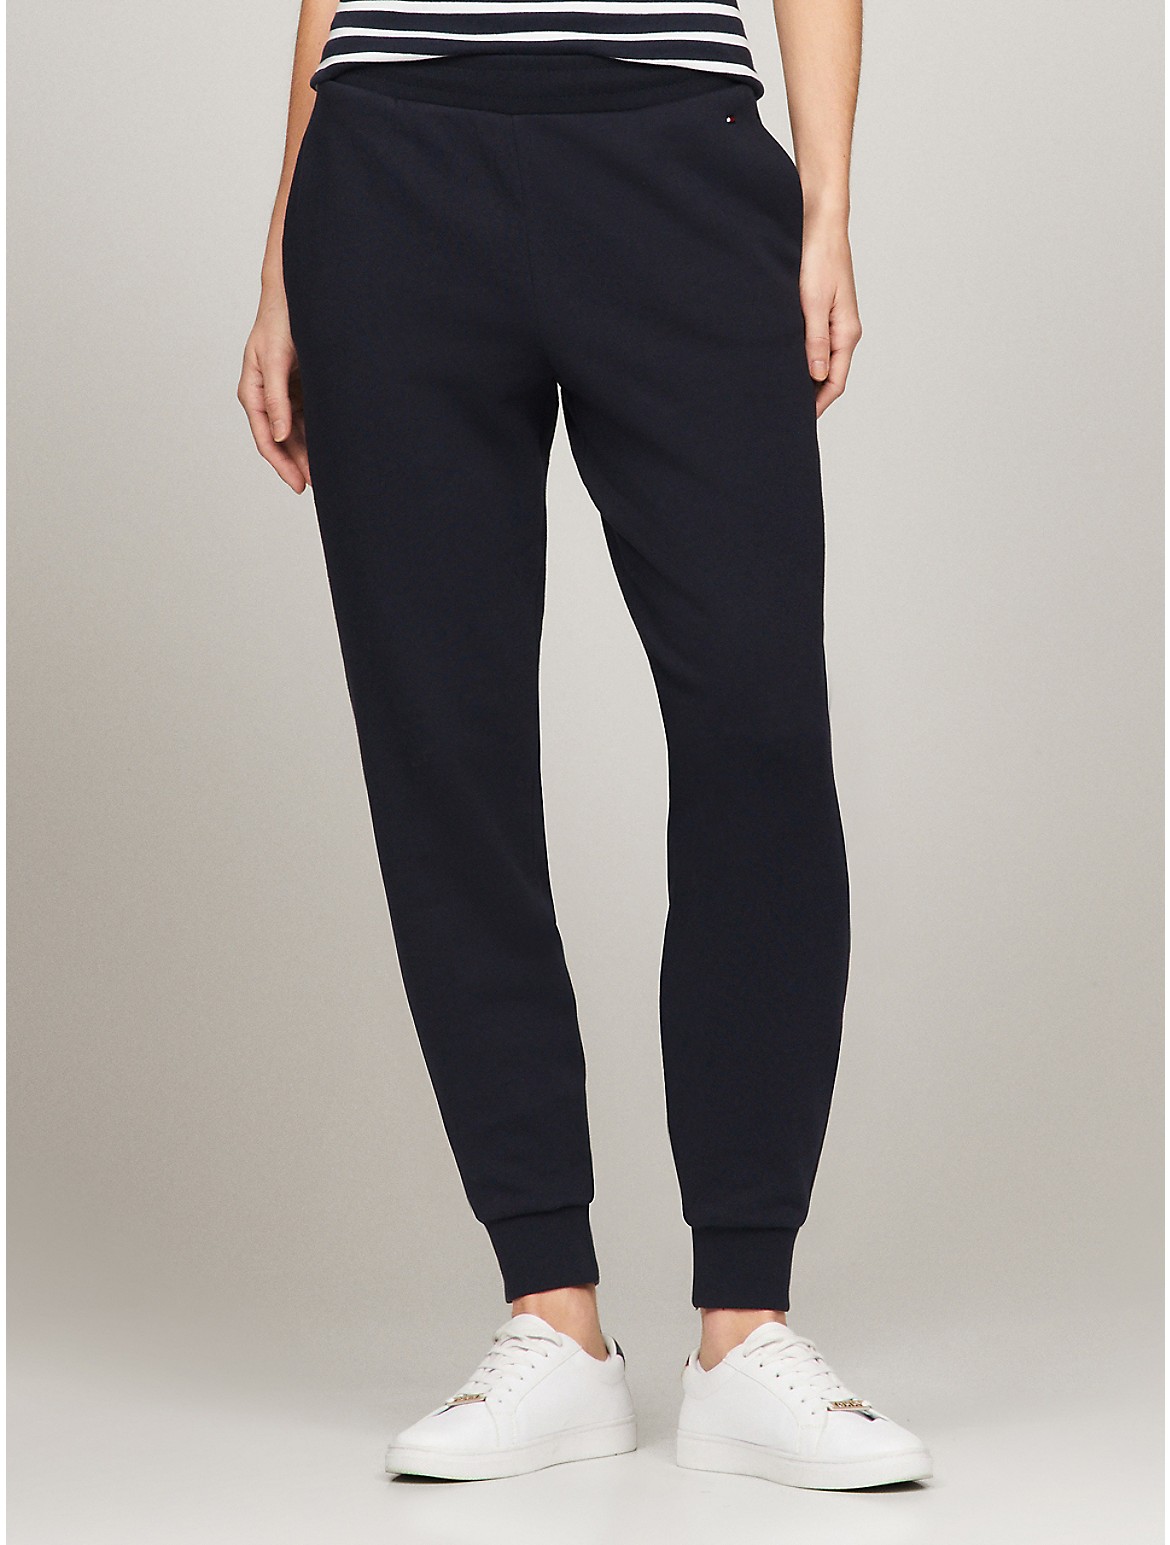 Tommy Hilfiger Women's Relaxed Fit Solid Sweatpant